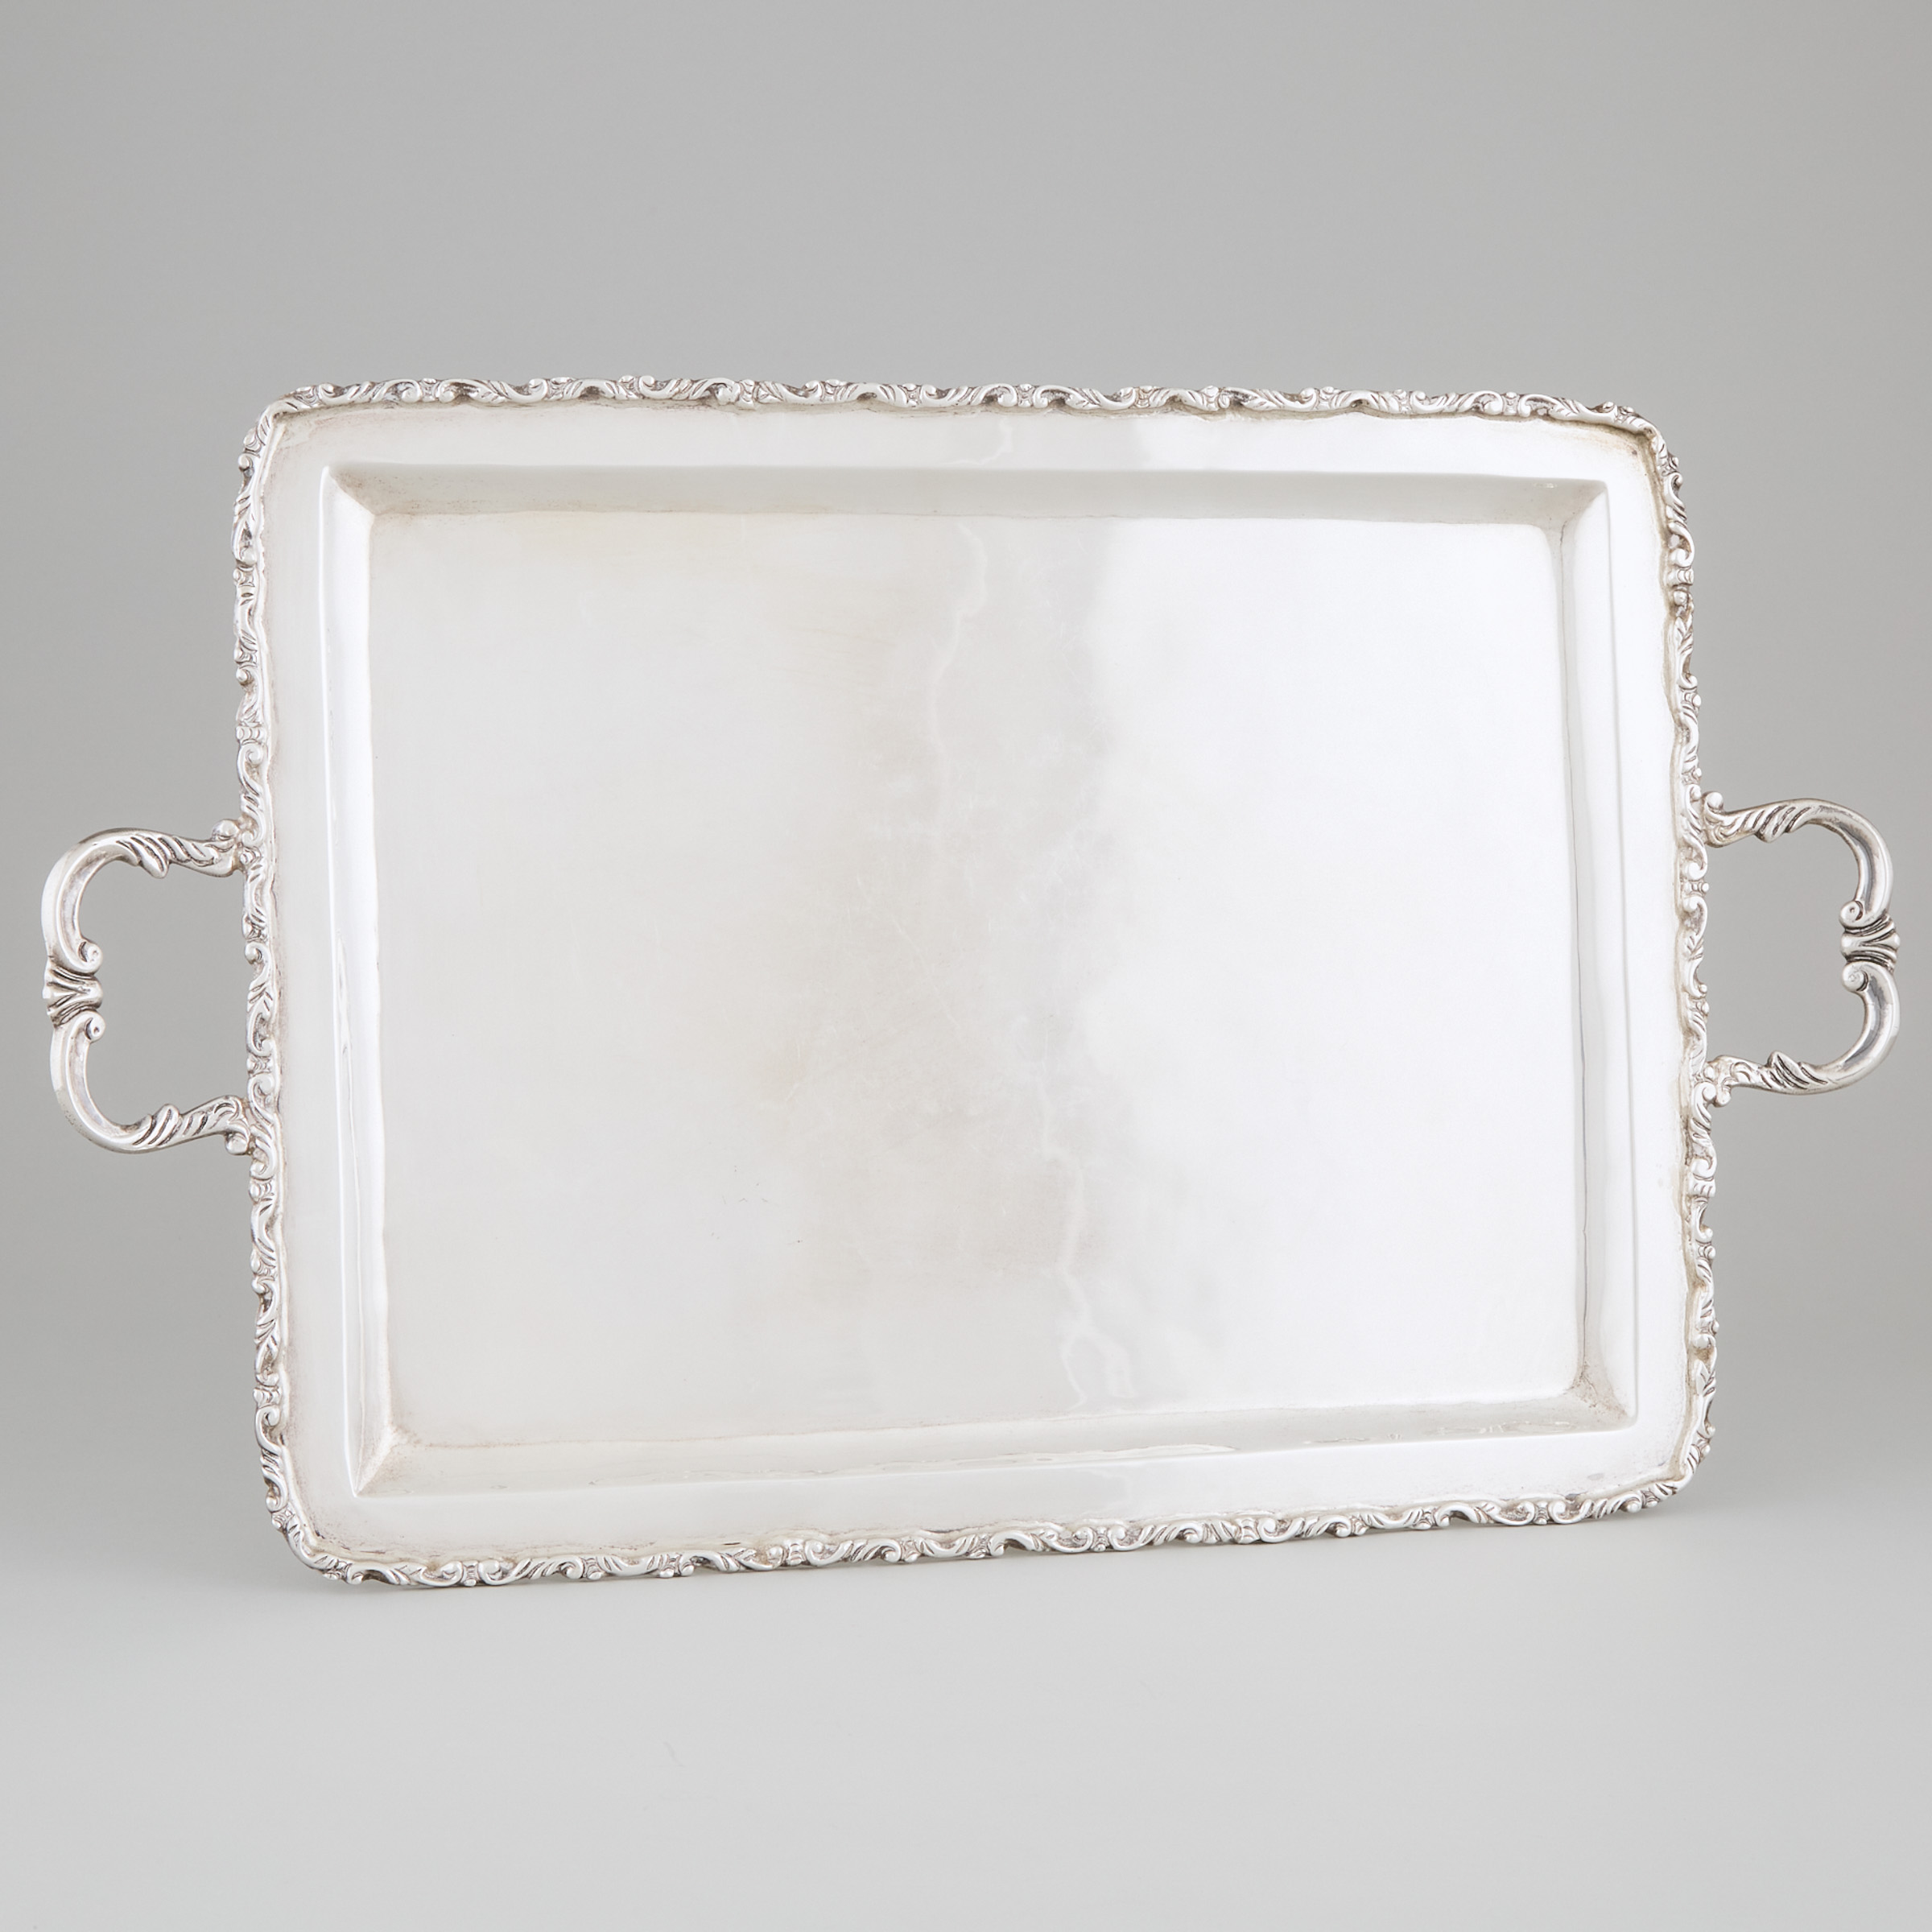 Mexican Silver Rectangular Serving Tray, 20th century